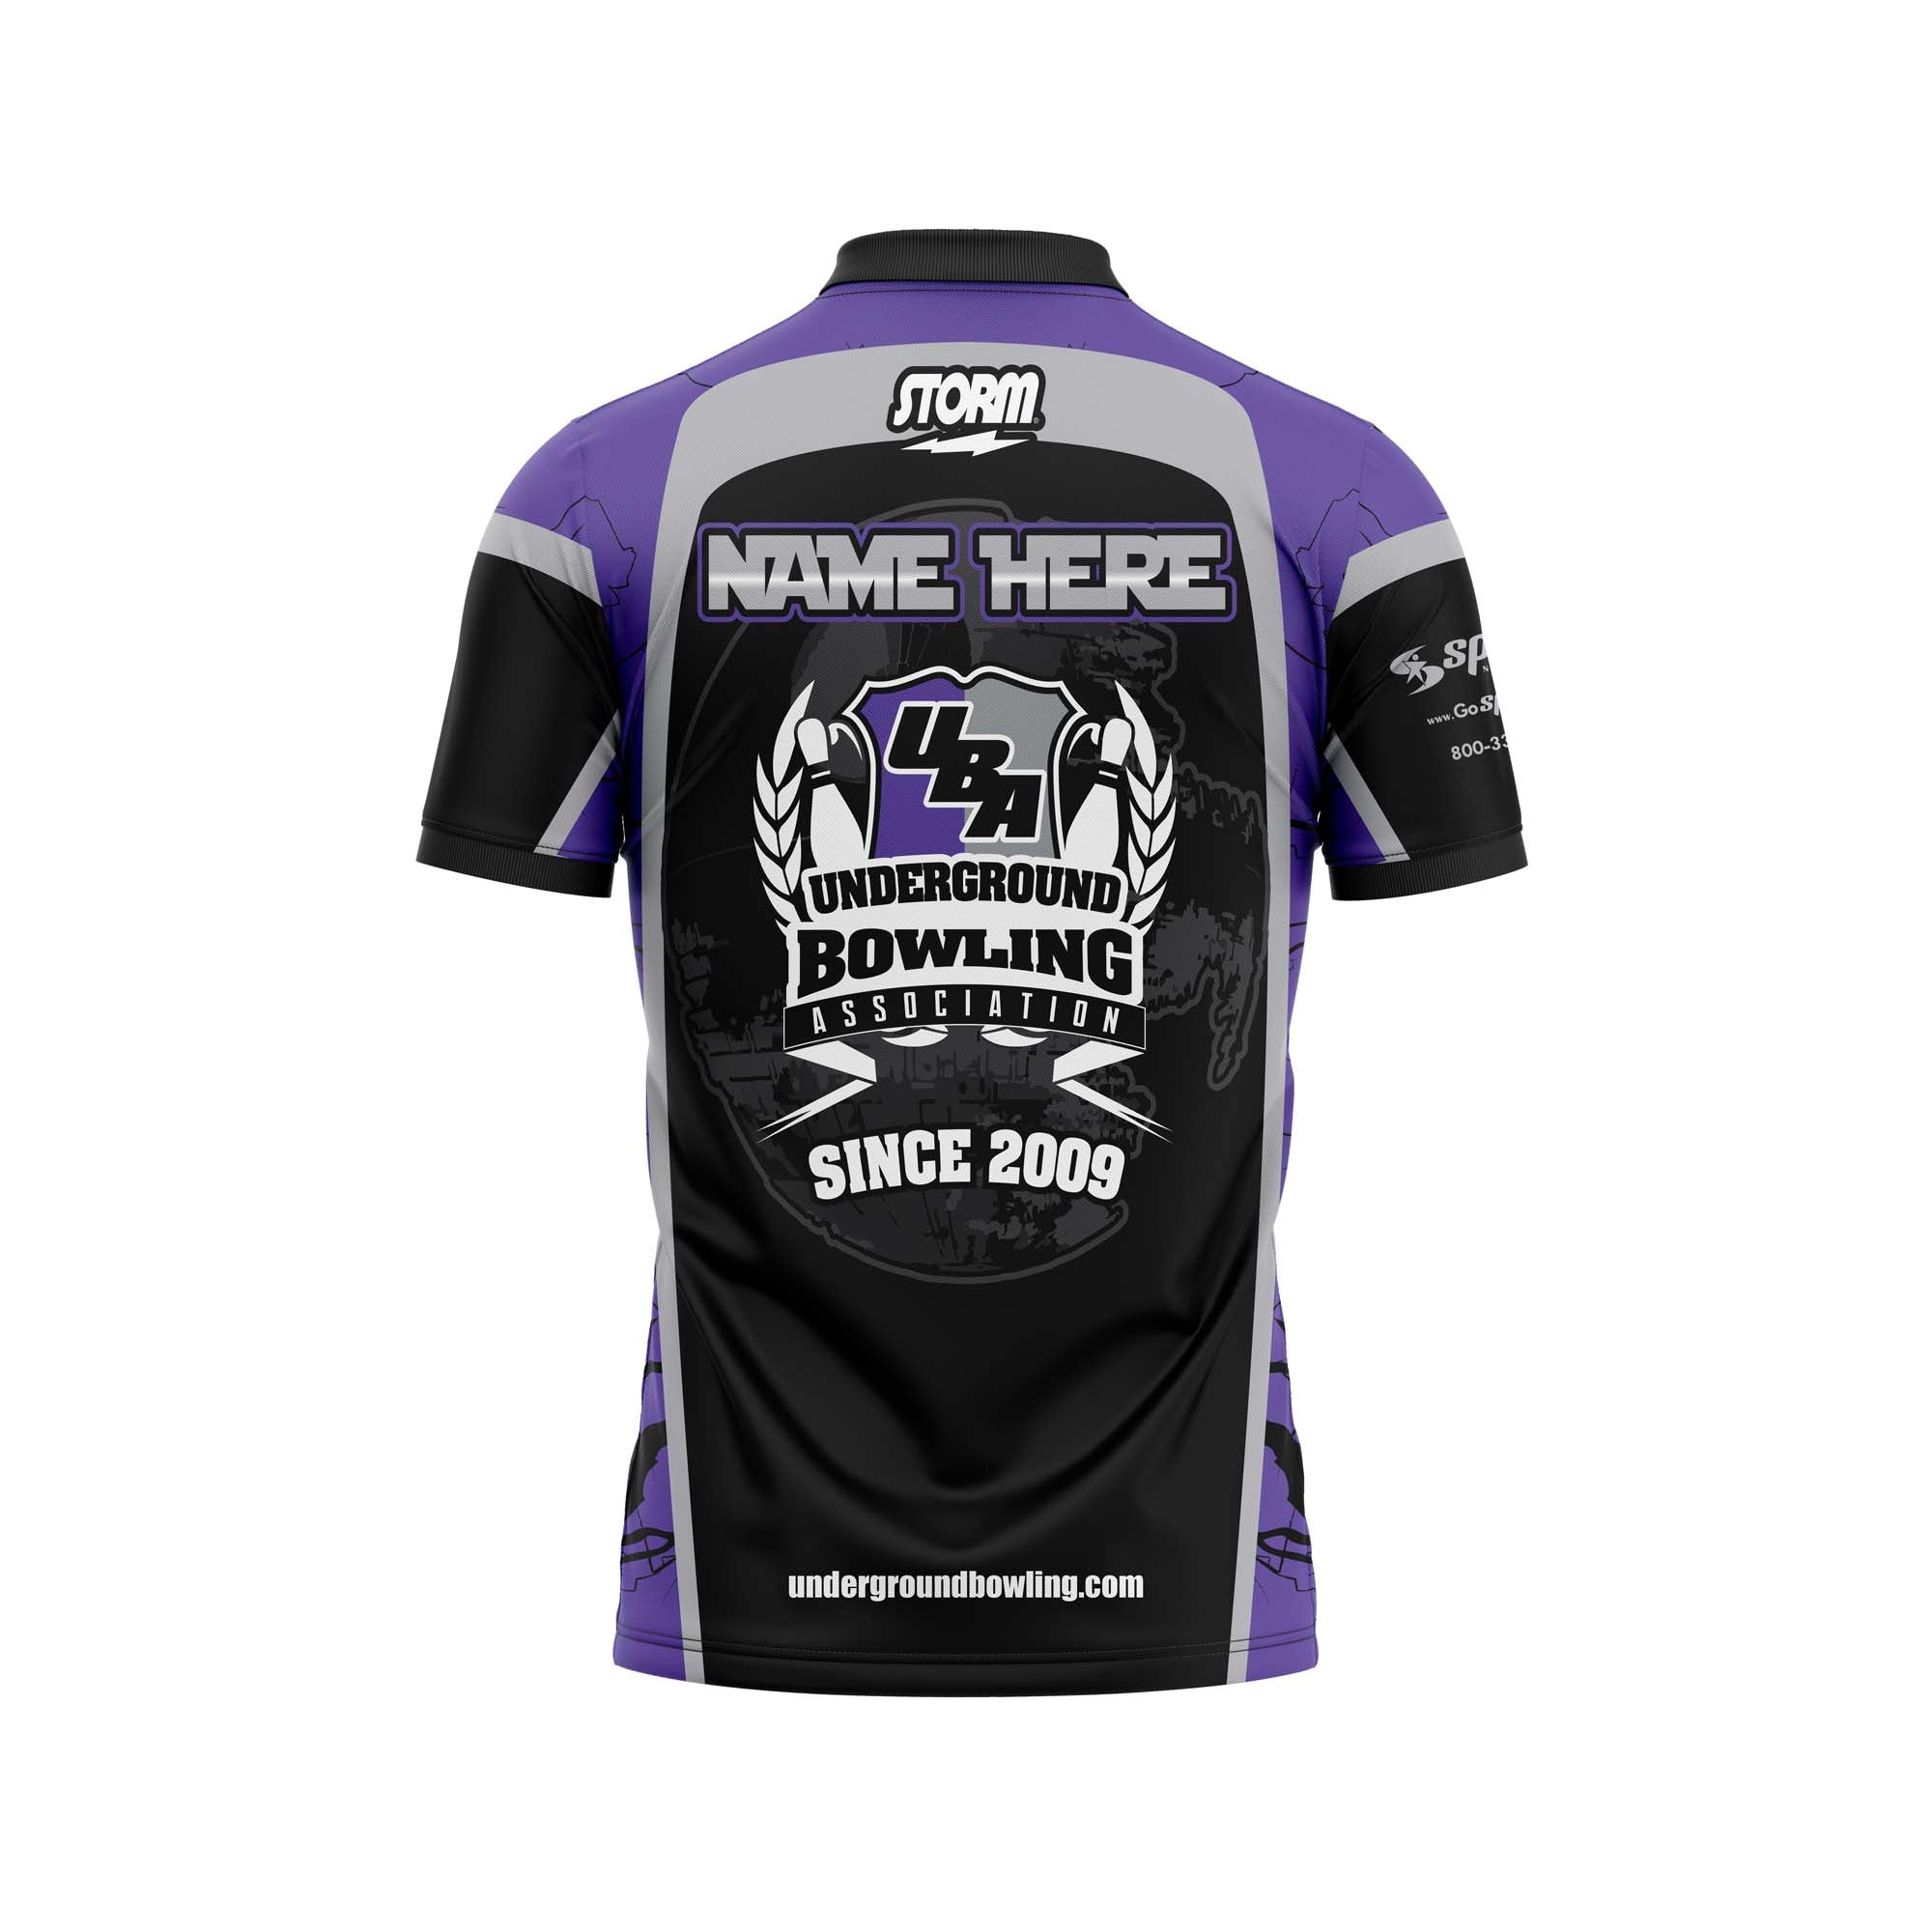 The Chosen Ones Home / Main Jersey